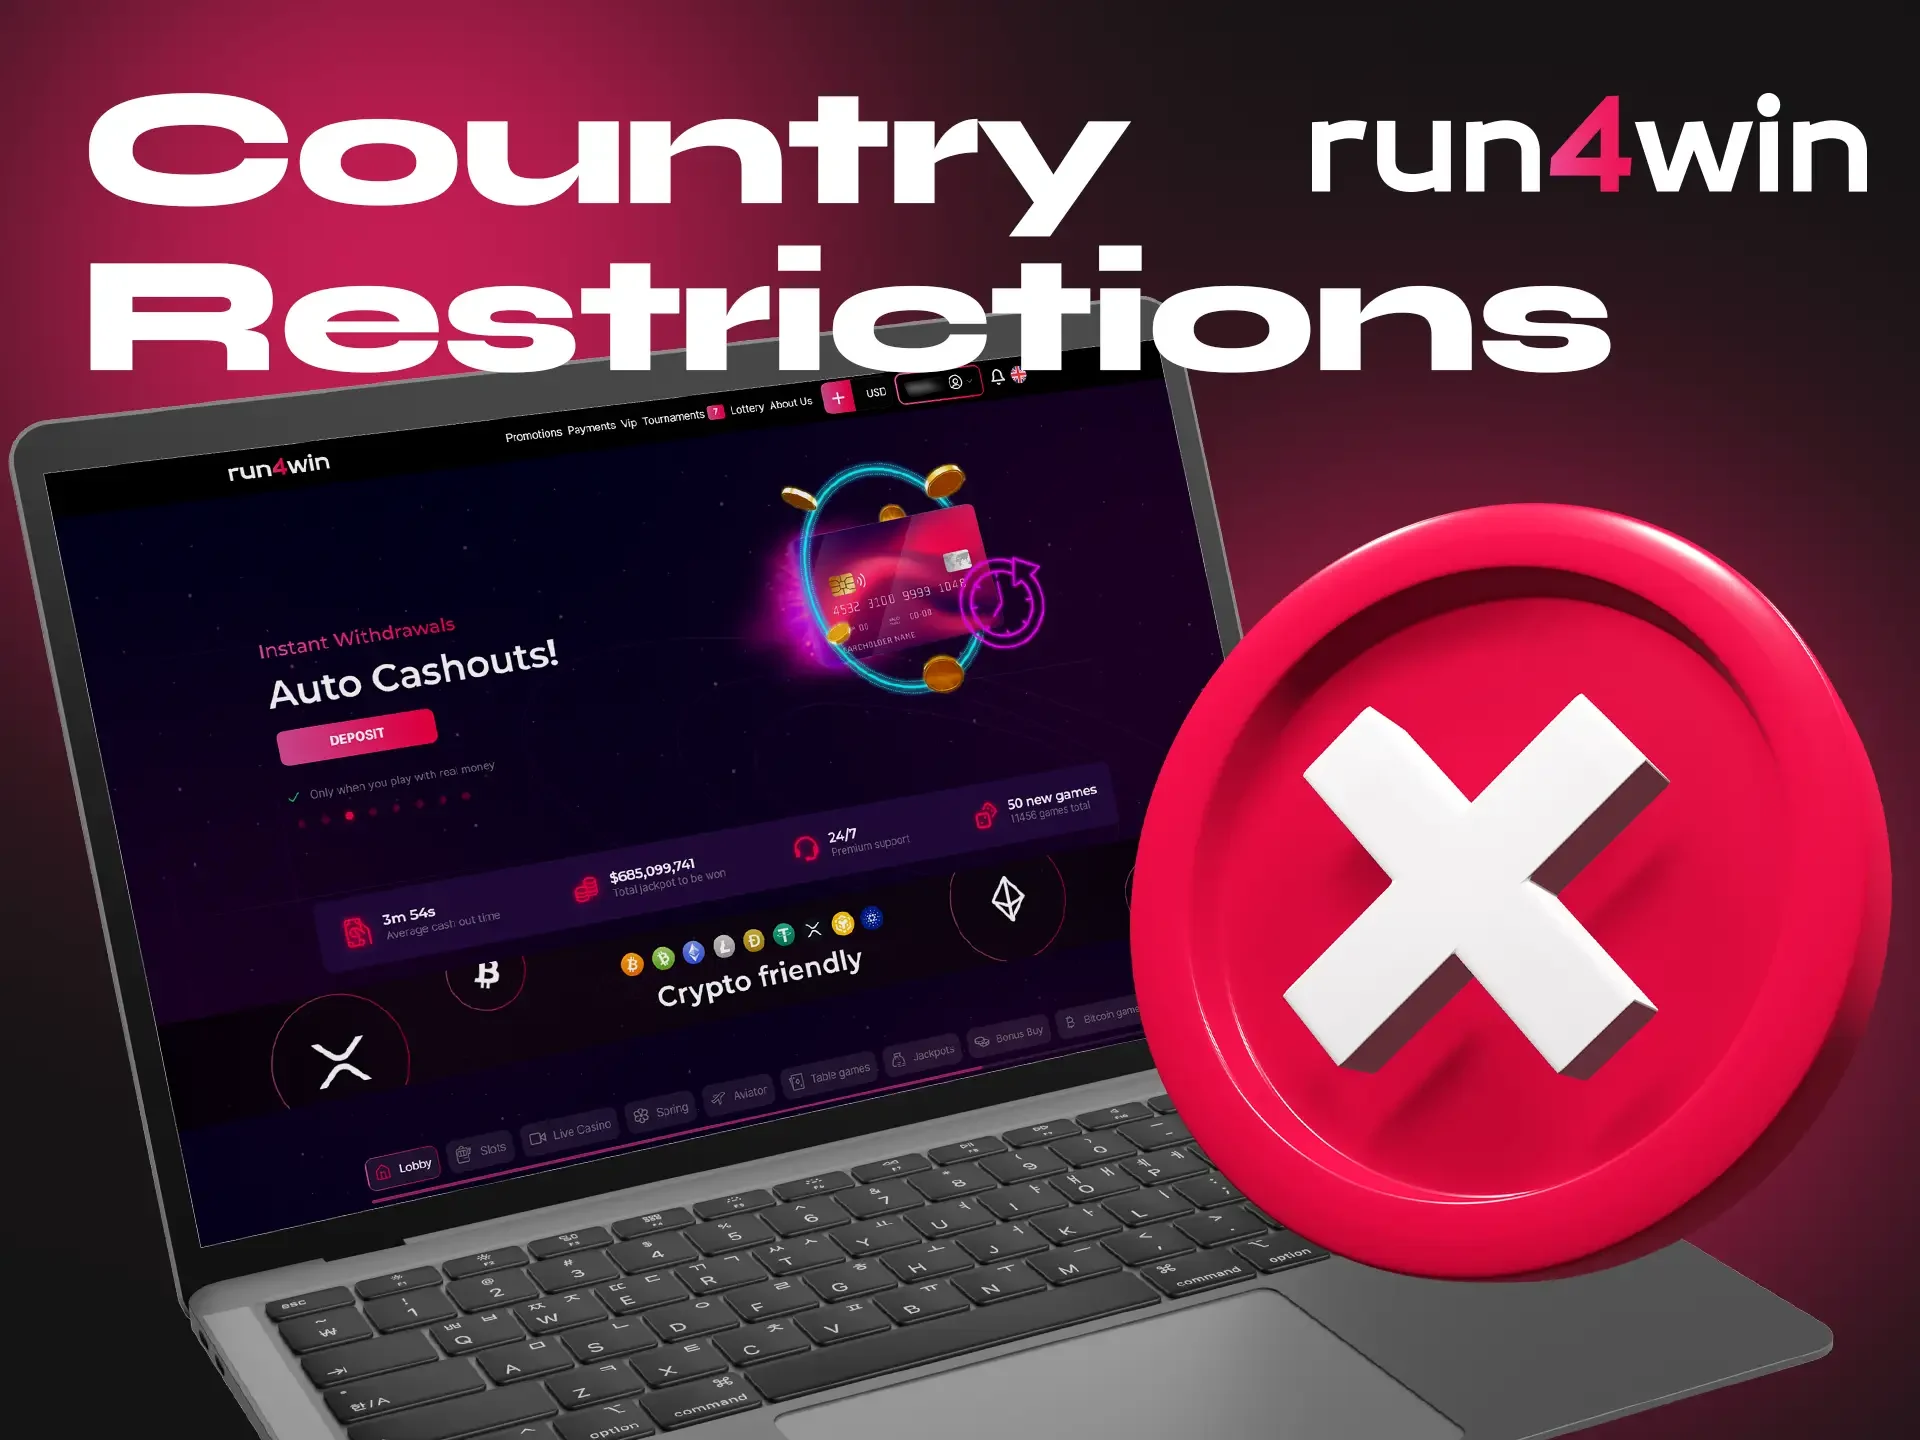 List of countries where Run4Win is not available.